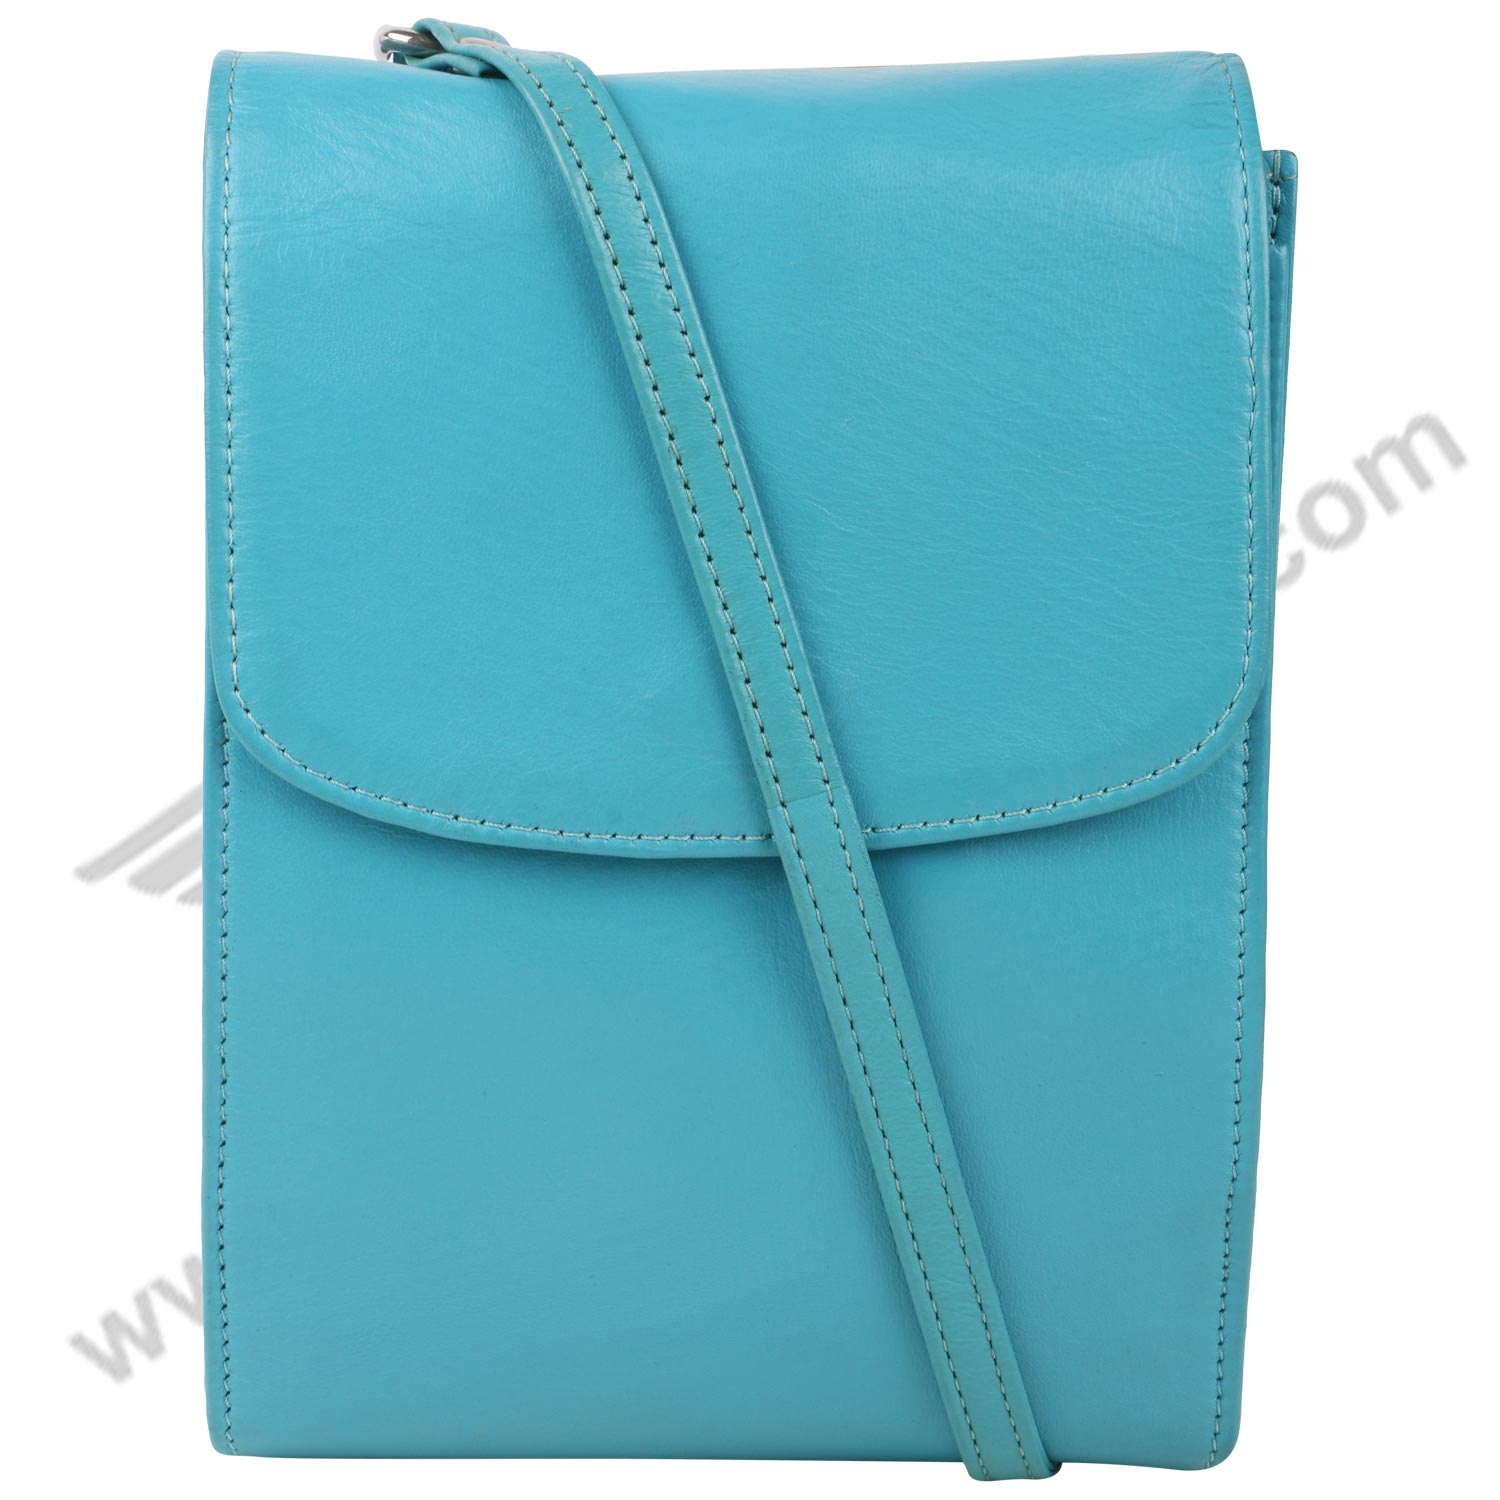 Close image of blue MULTI POCKET CROSS BODY HAND BAG.  Sling is wrapped around the bag